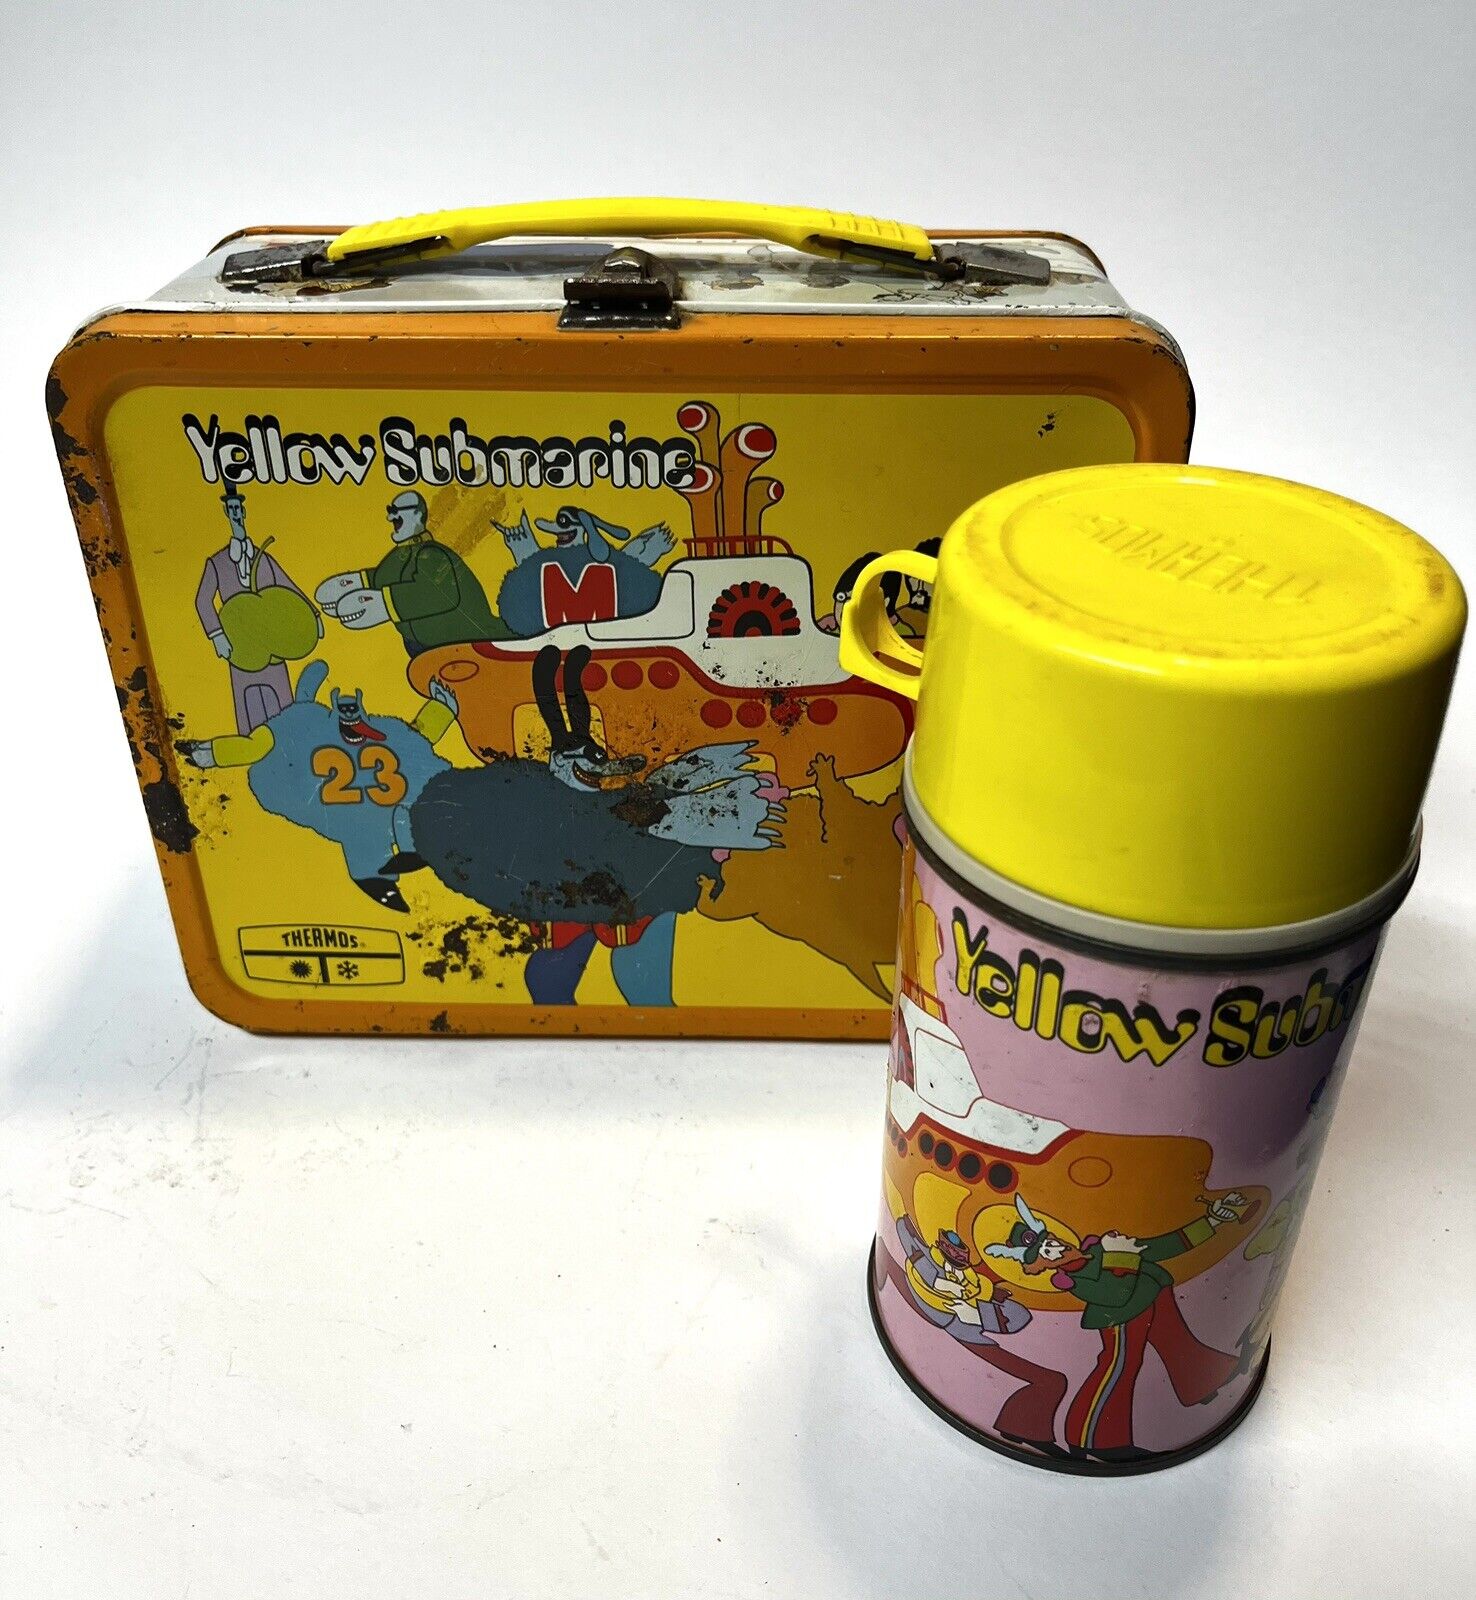 The Beatles Vintage Original 1968  Yellow Submarine Lunchbox And Thermos Set